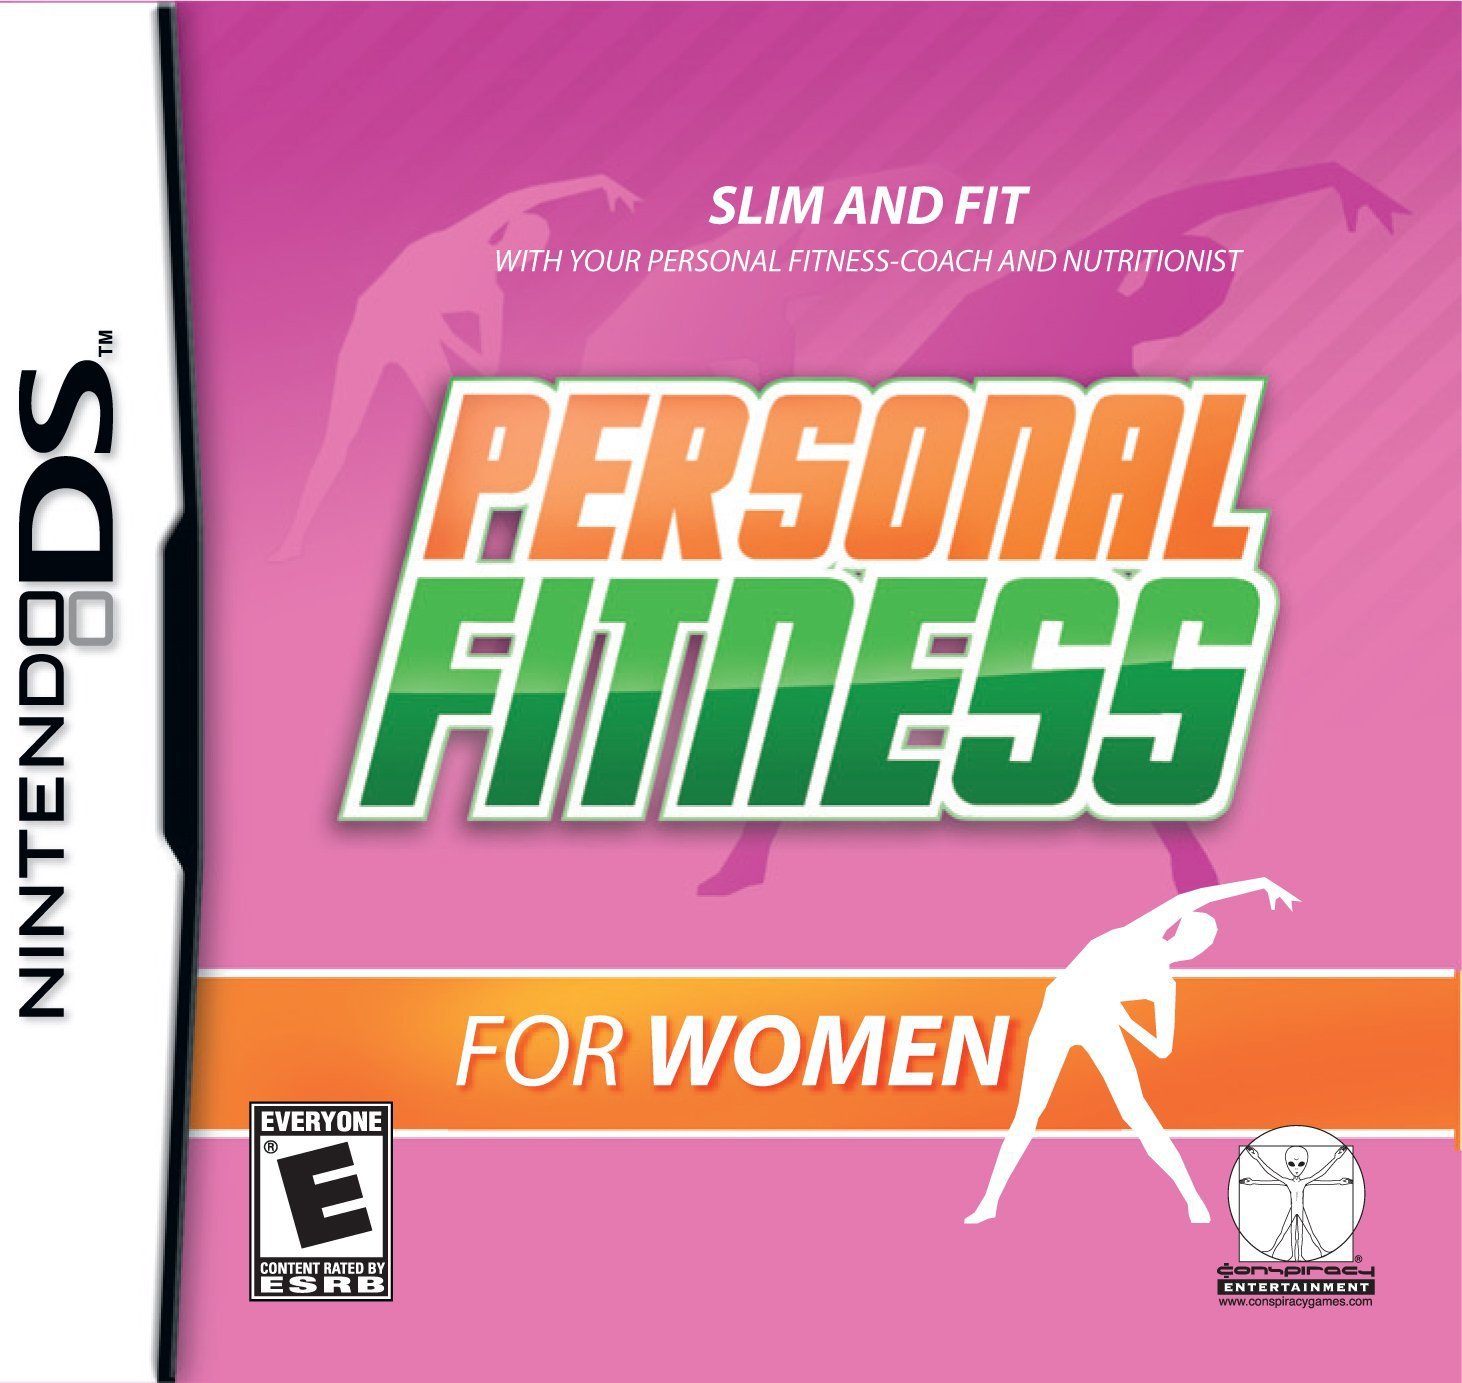 Personal Fitness for Women